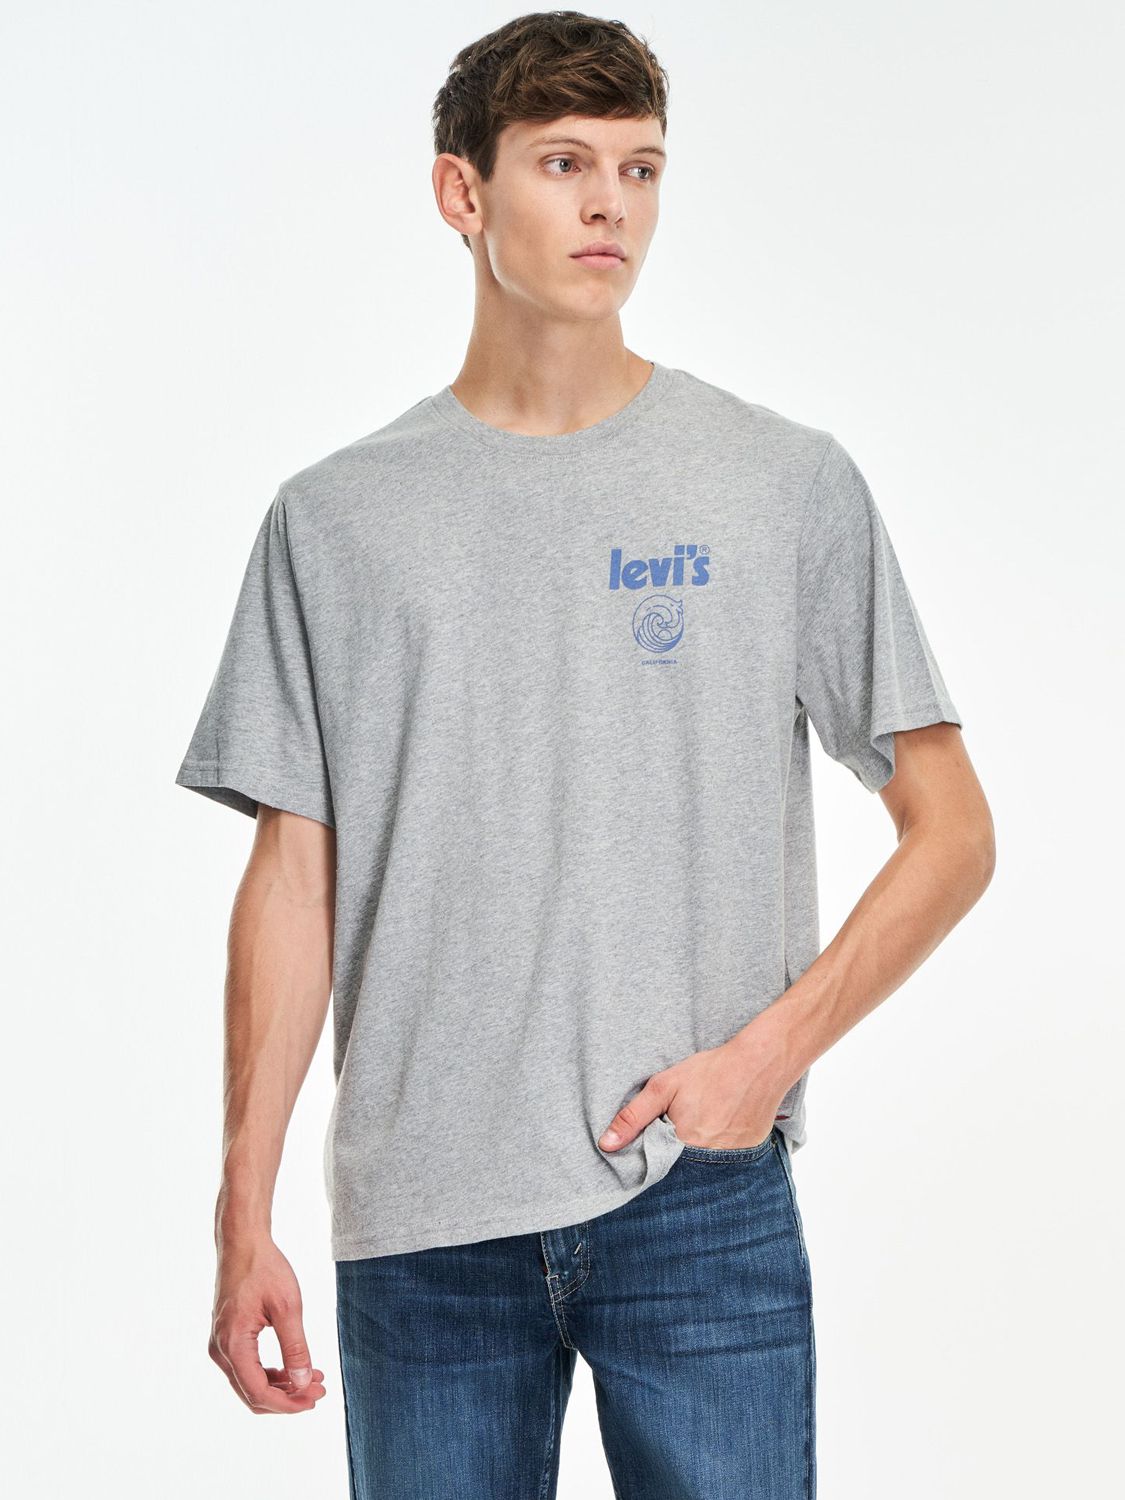 Levi's Relaxed Fit Logo Print T-Shirt, Grey